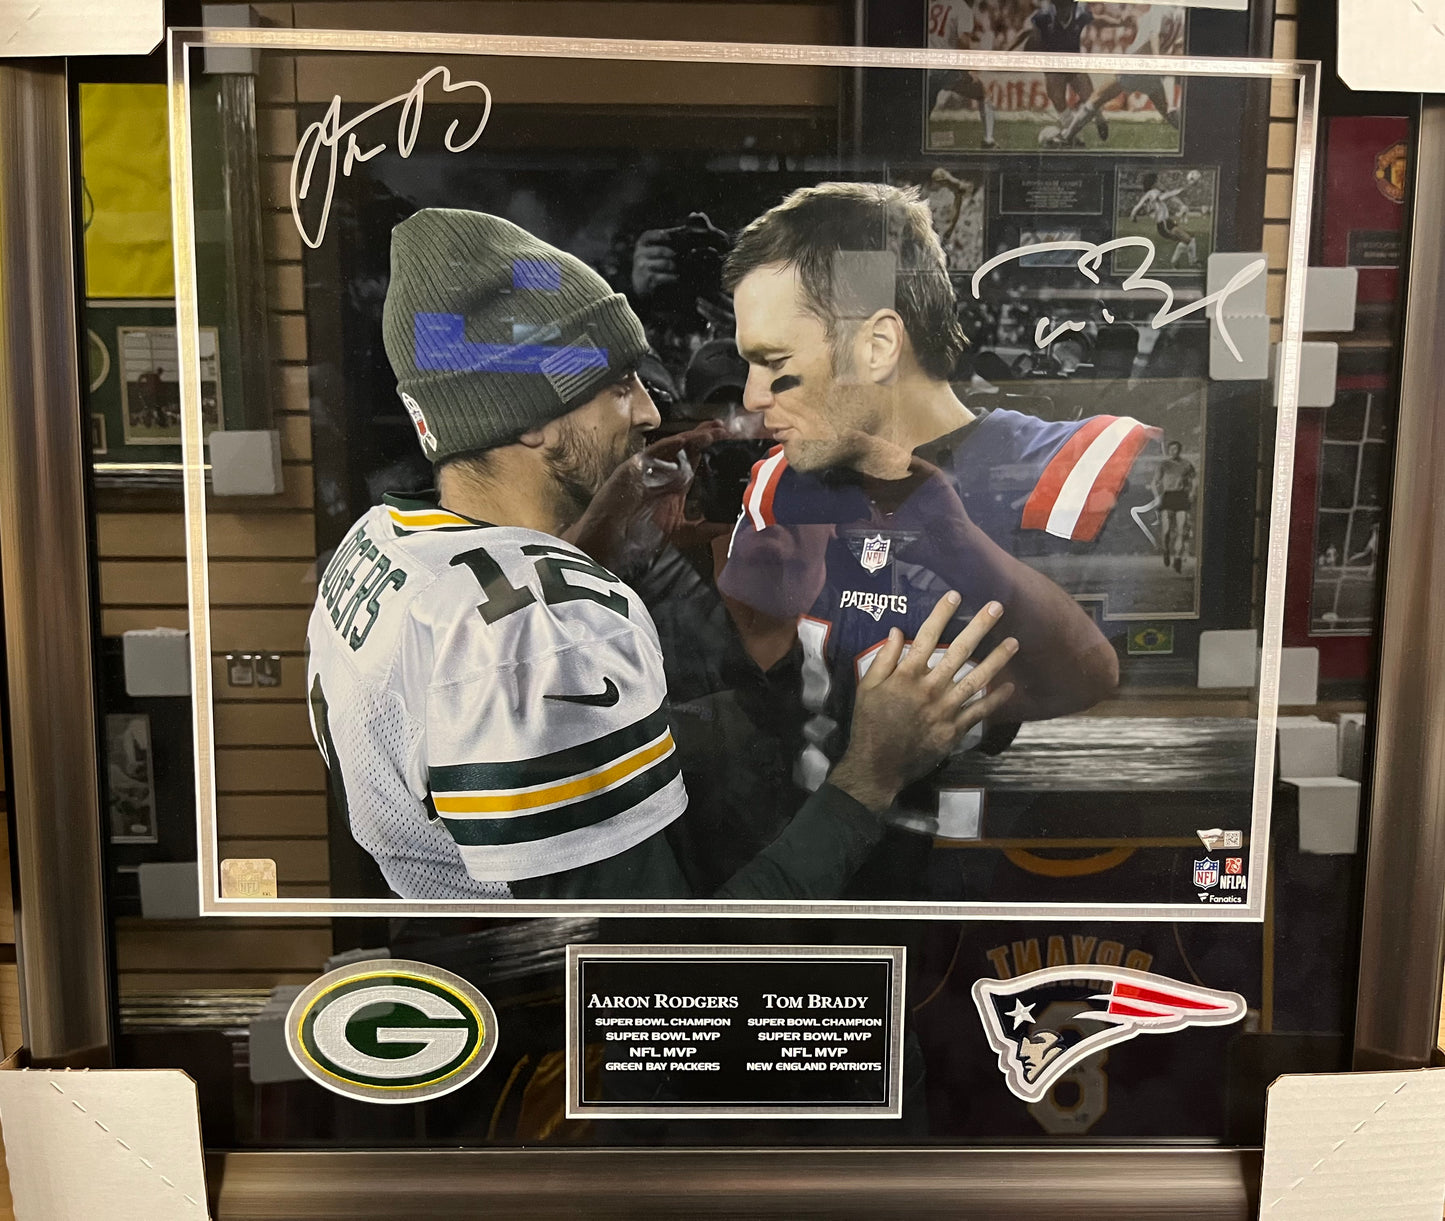 Tom Brady and Aaron Rodgers signed 16x20  Profressionally mattted and framed to 22x24